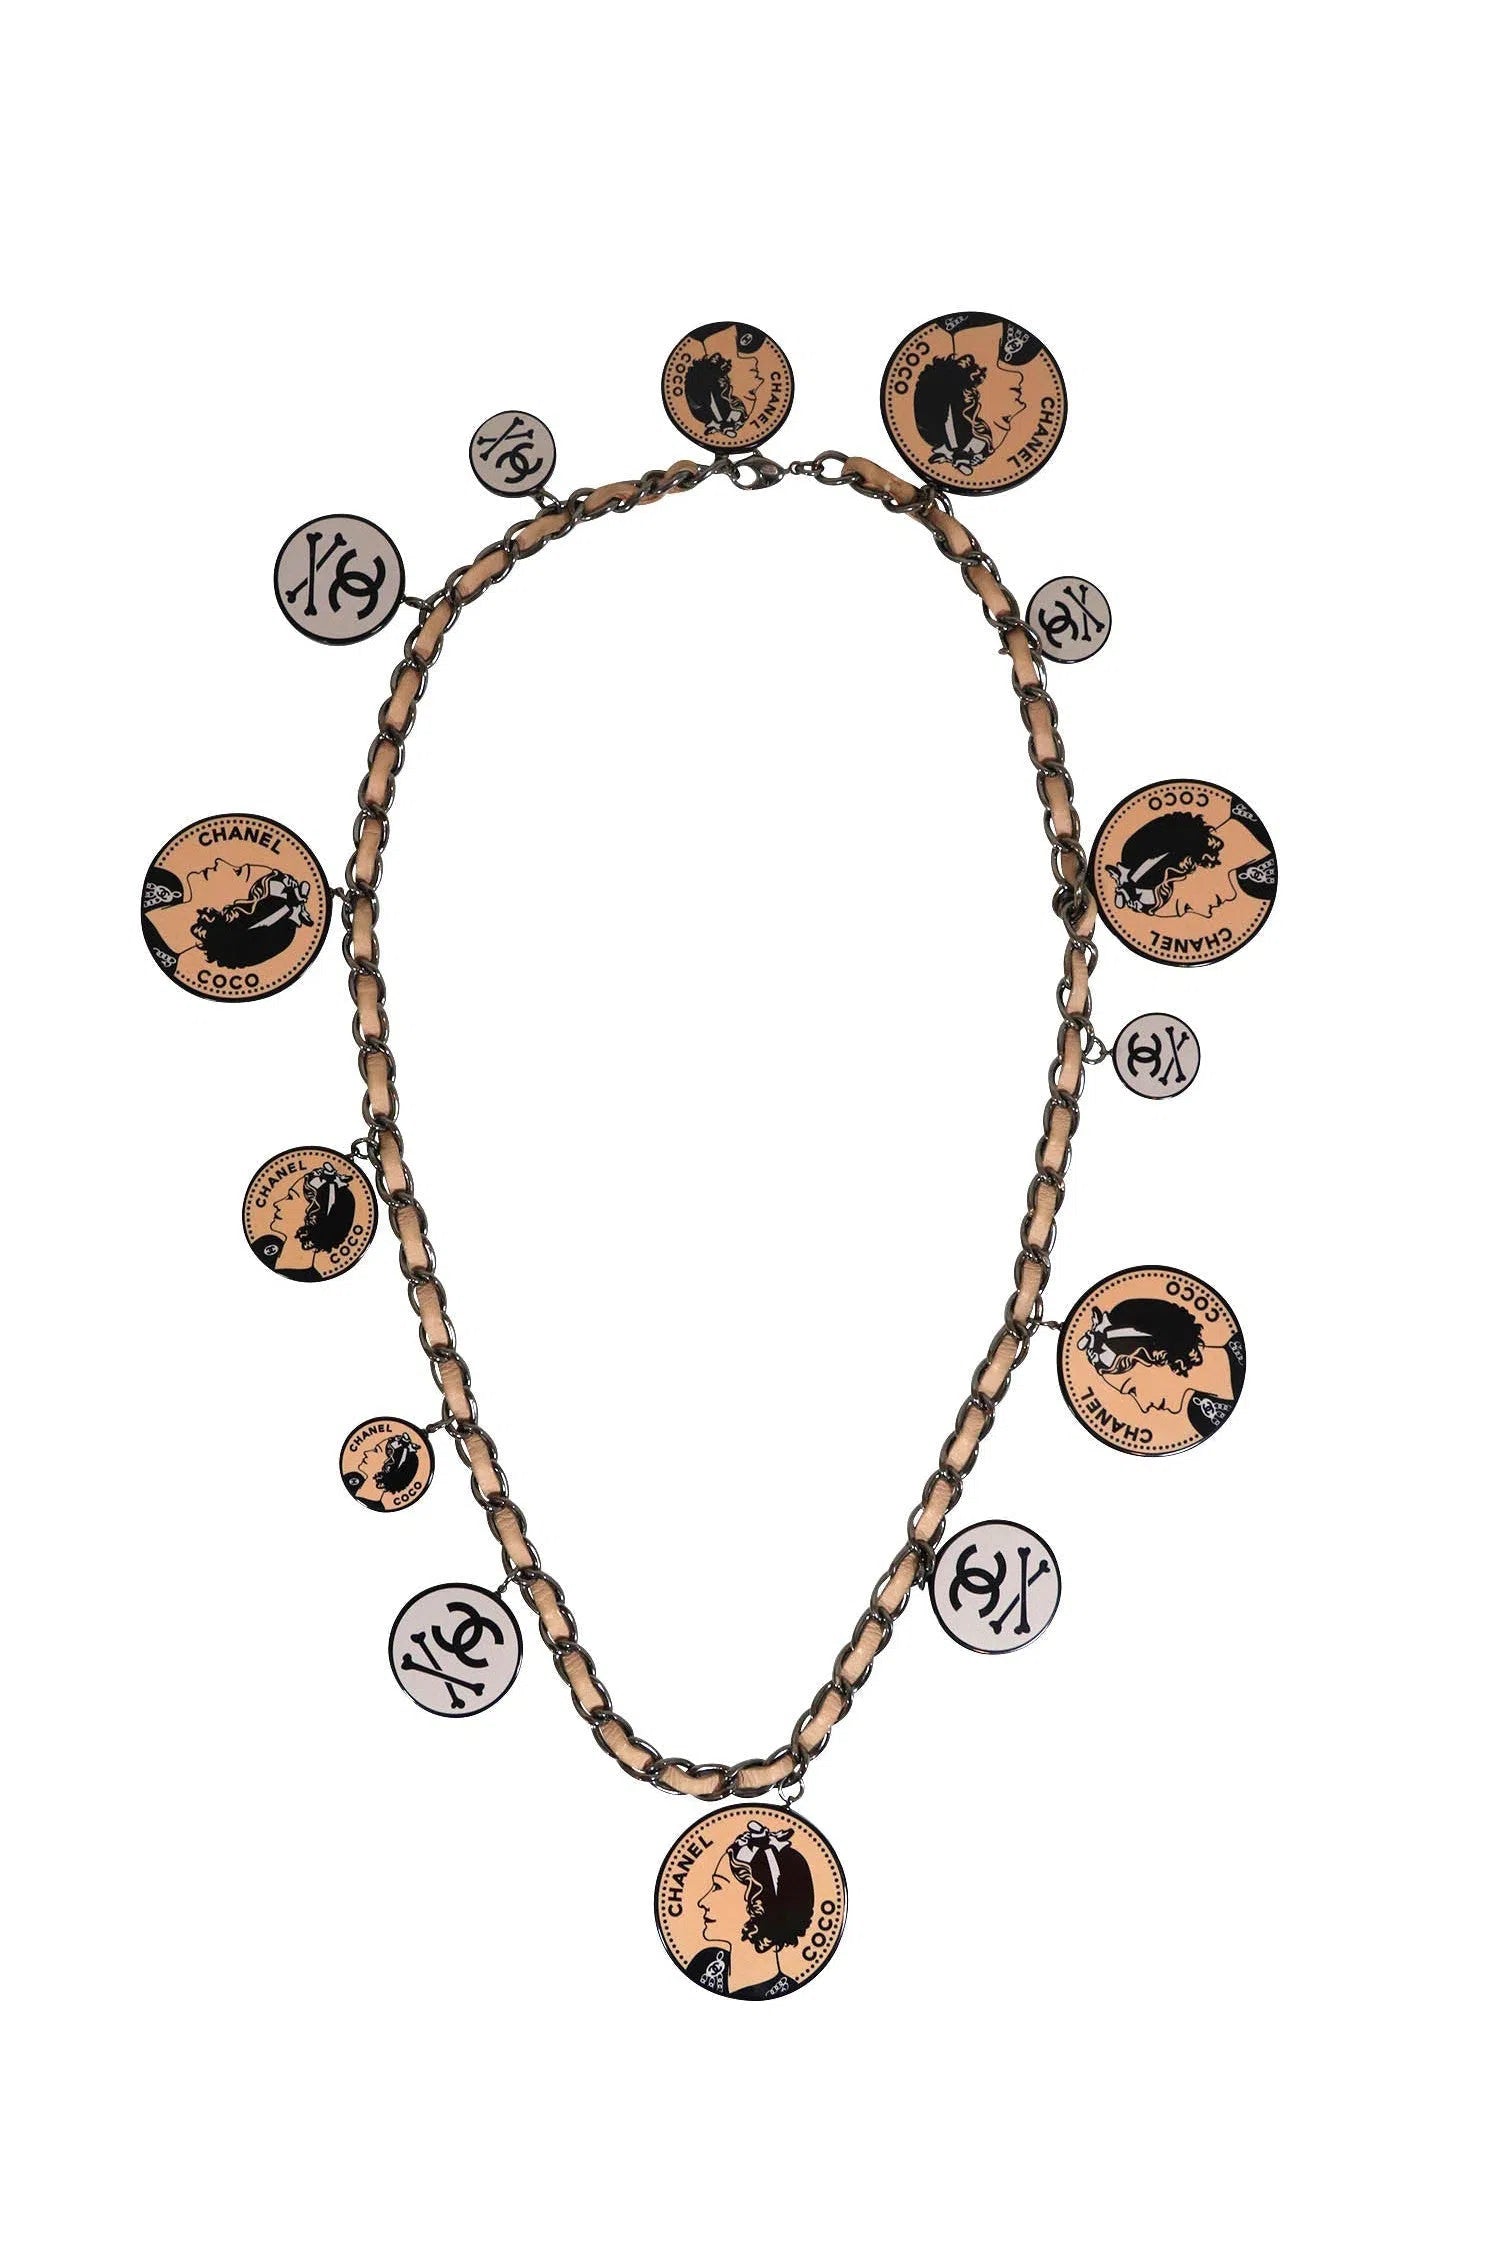 Chanel Coco Skull Crossbones Charm Necklace - Foxy Couture Carmel